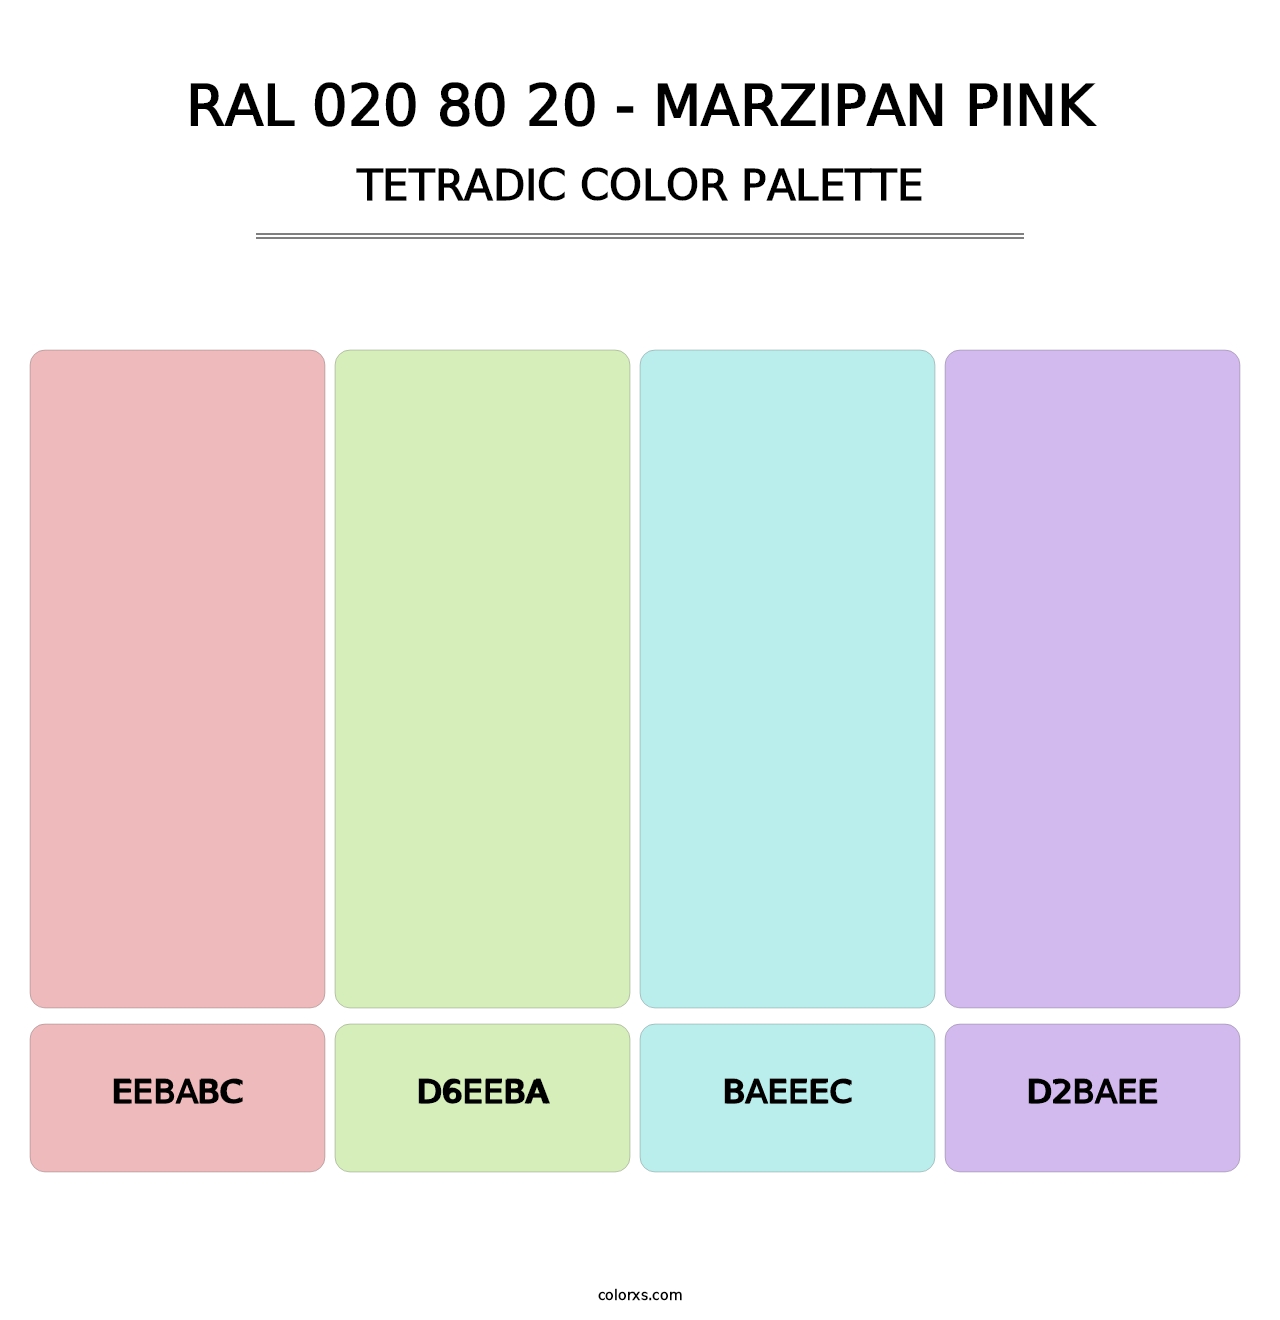 RAL 020 80 20 - Marzipan Pink - Tetradic Color Palette